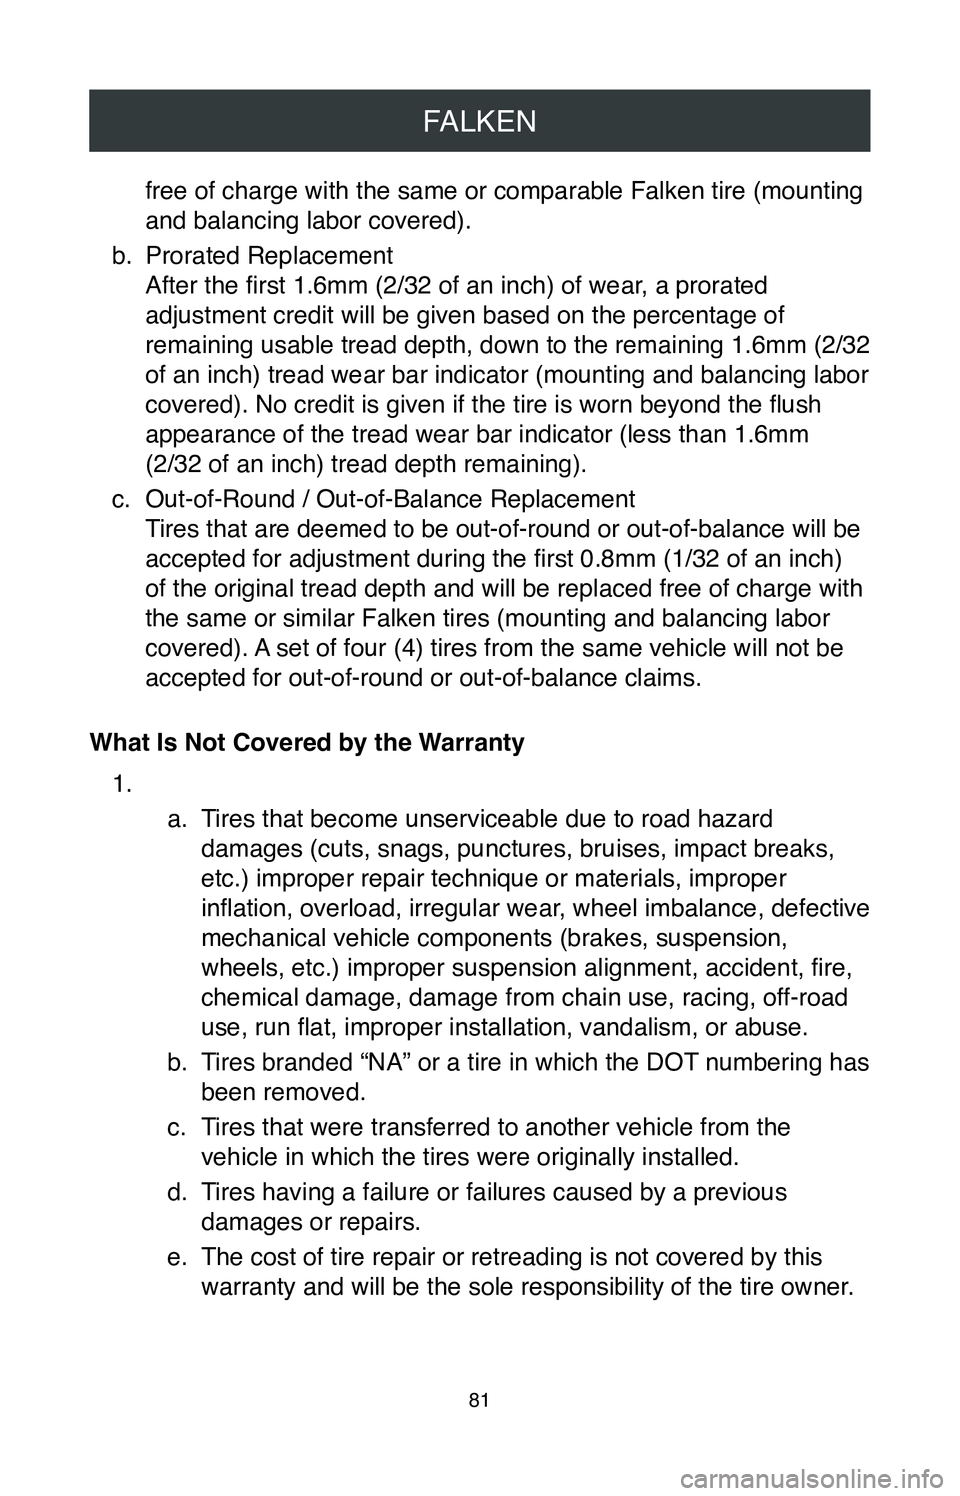 TOYOTA COROLLA 2020  Warranties & Maintenance Guides (in English) FALKEN
81
free of charge with the same or comparable Falken tire (mounting 
and balancing labor covered).
b.
 Prorated Replacement 
After the first 1.6mm (2/32 of an inch) of wear, a prorated 
adjustm